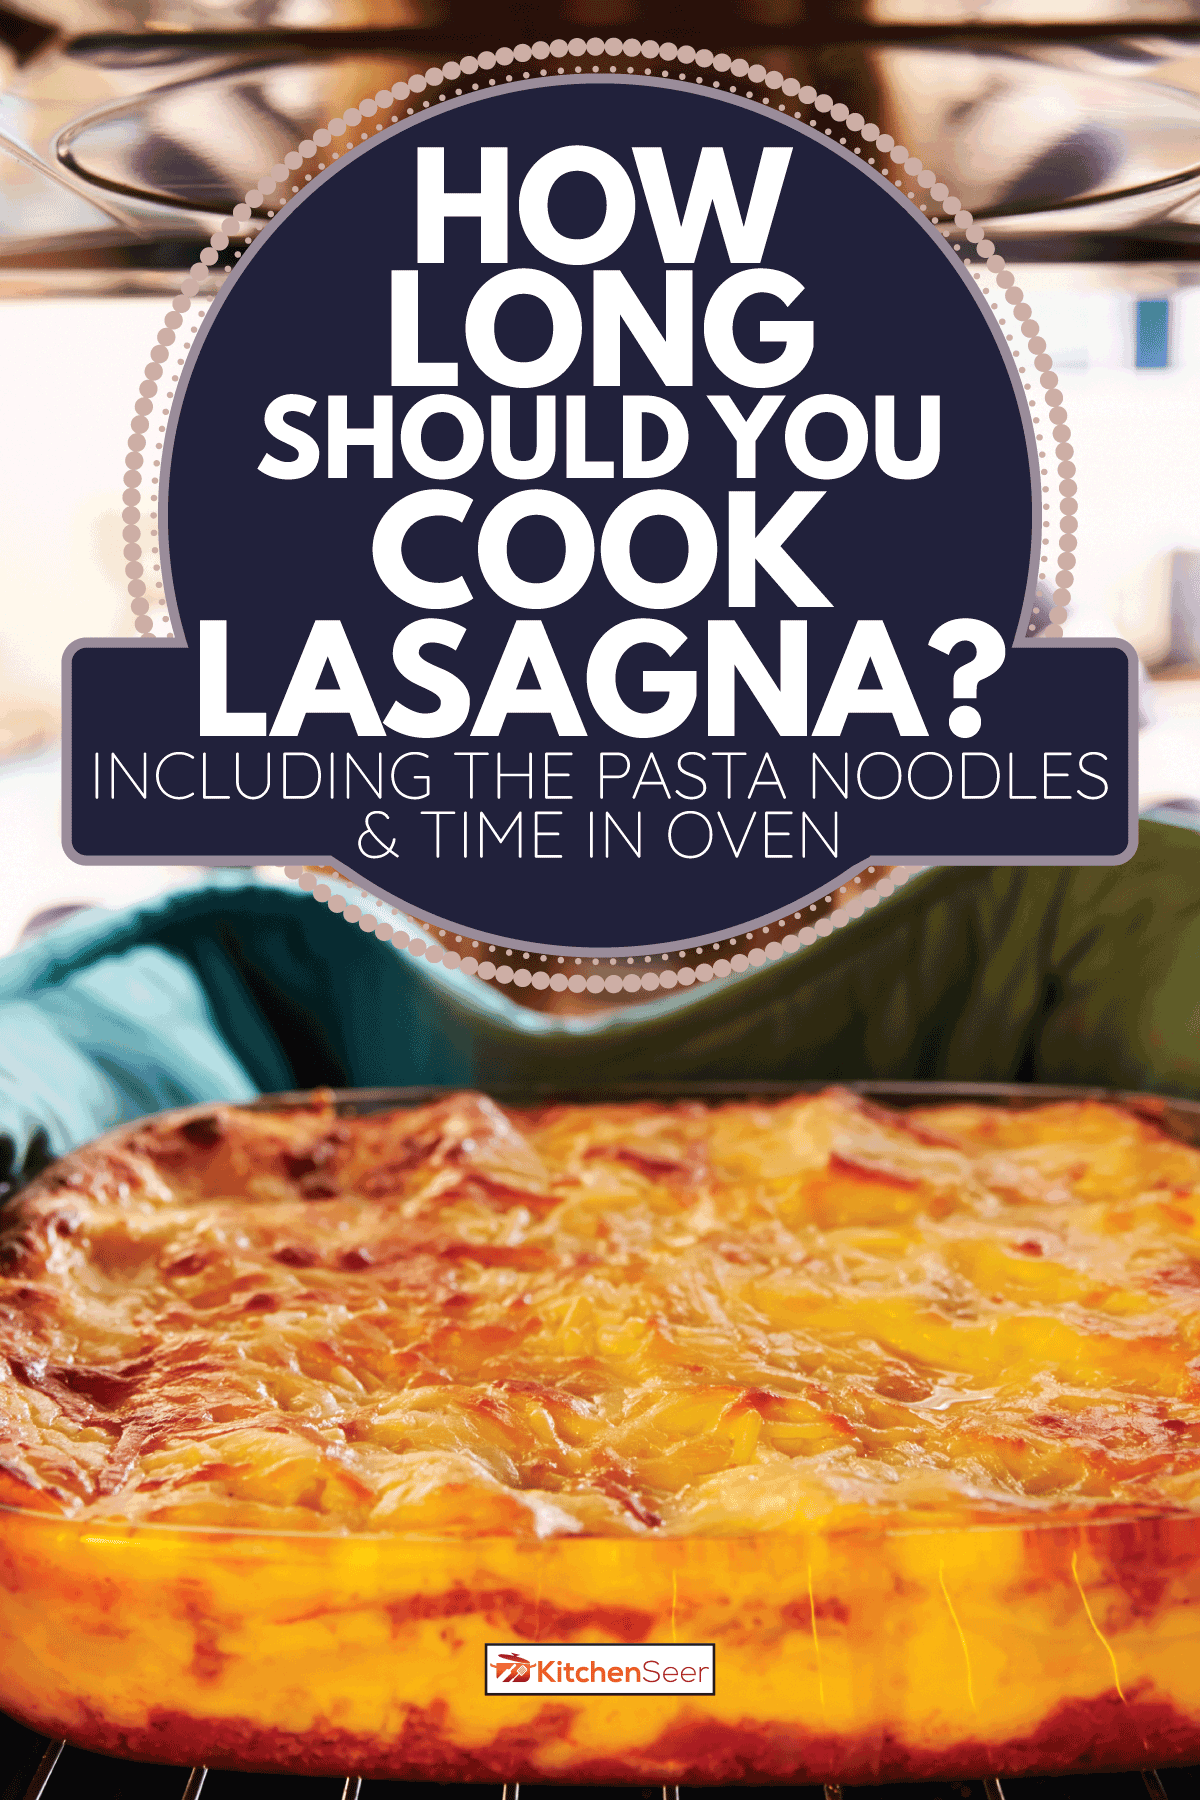 Woman Taking Cooked Dish Of Lasagne Out Of The Oven. How Long Should You Cook Lasagna [Including The Pasta Noodles & Time In Oven]